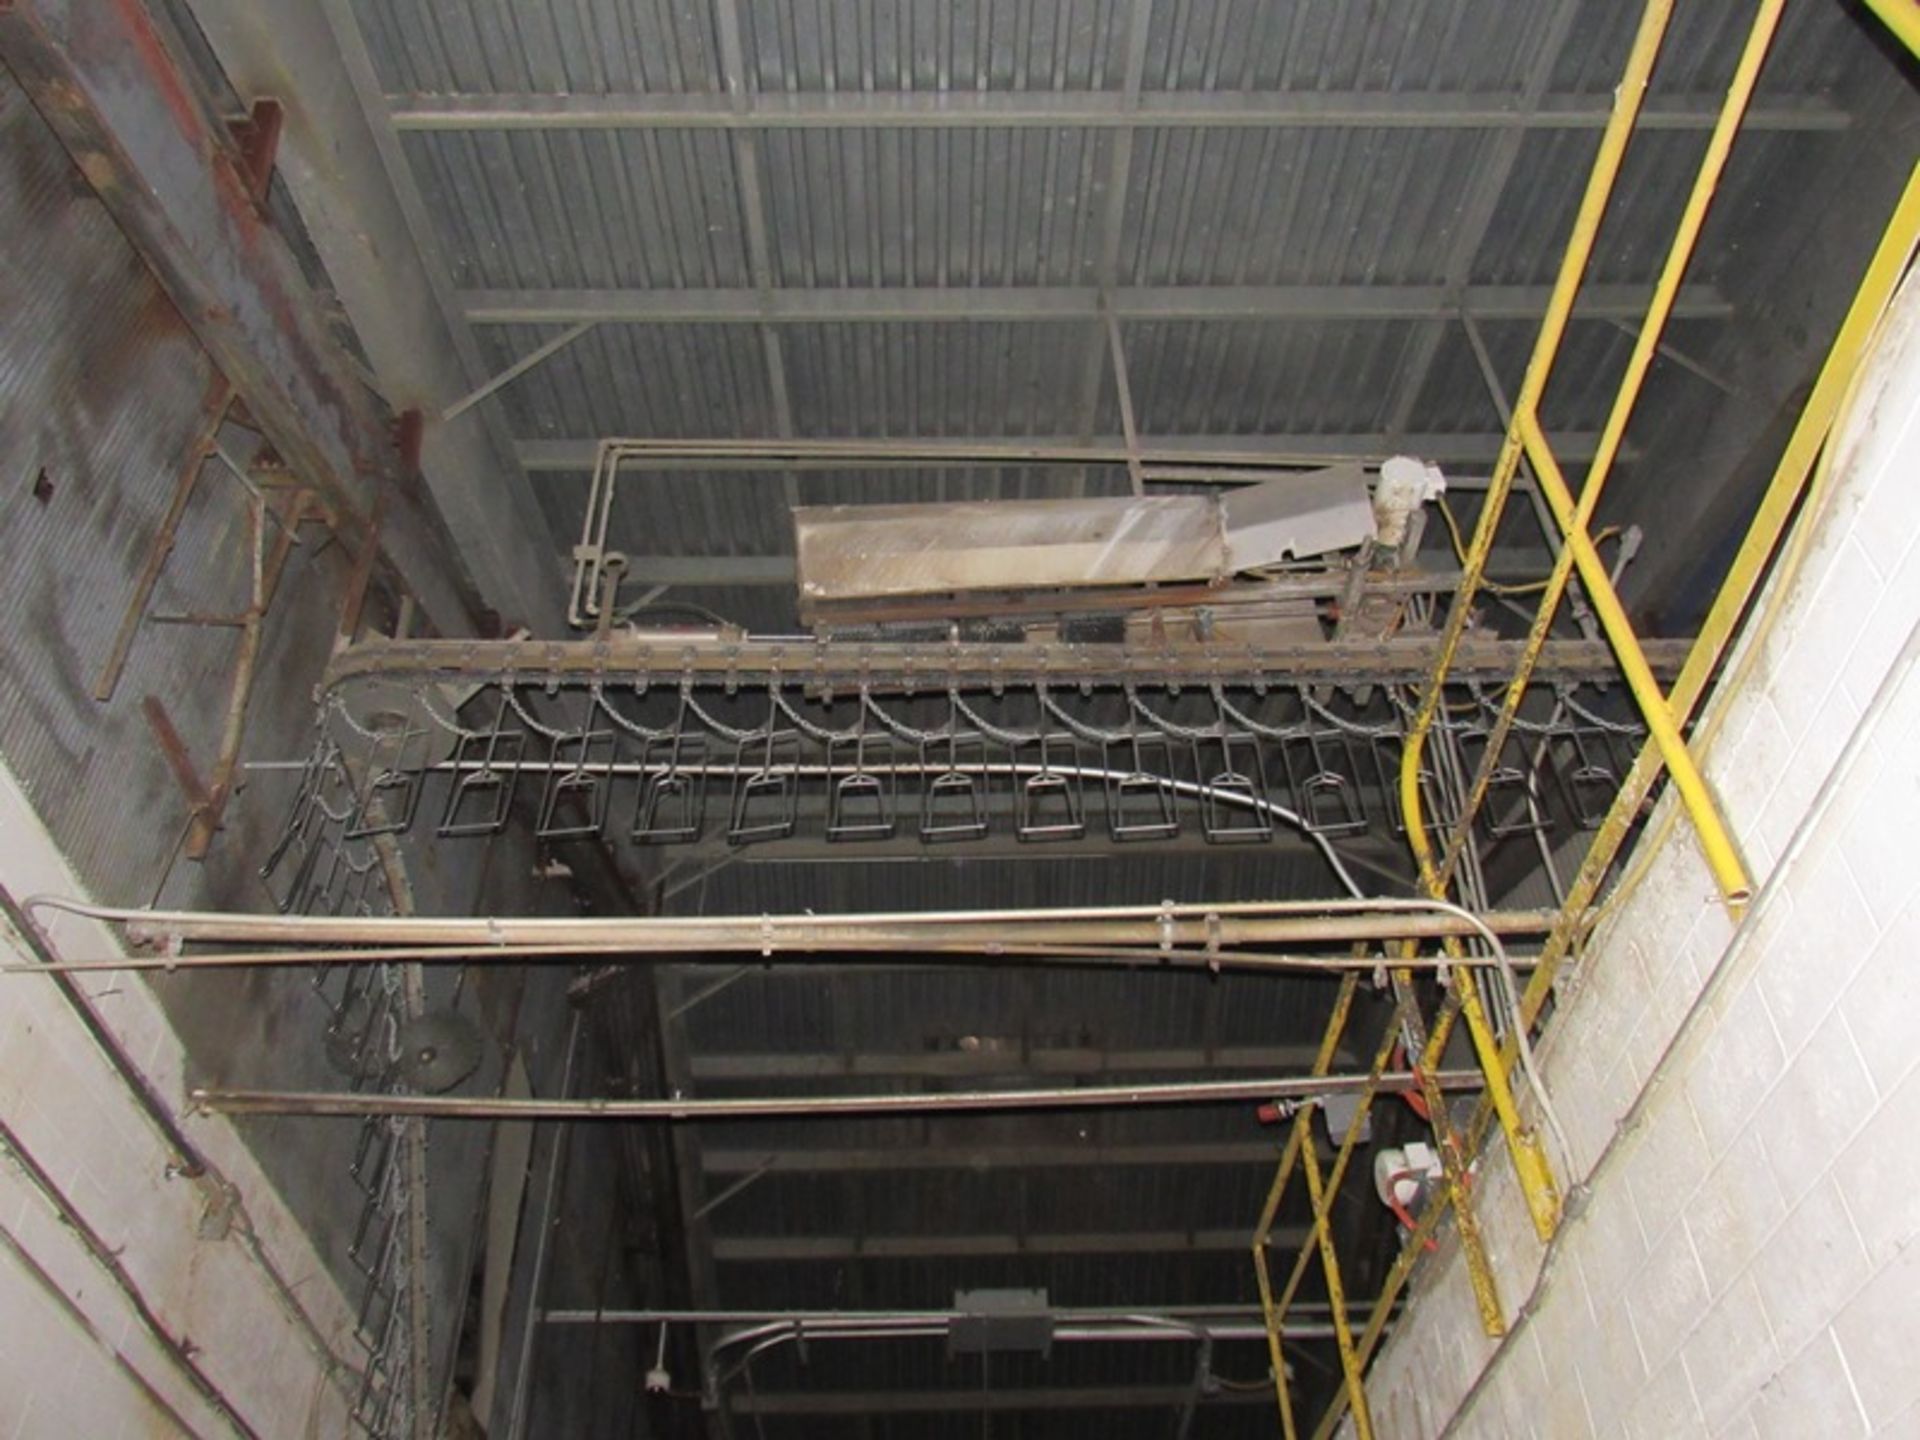 Lot Rail, Hangers and Chain approx. 800 stainless steel turkey Hangers on approx. | Rig Fee: $5200 - Image 4 of 15